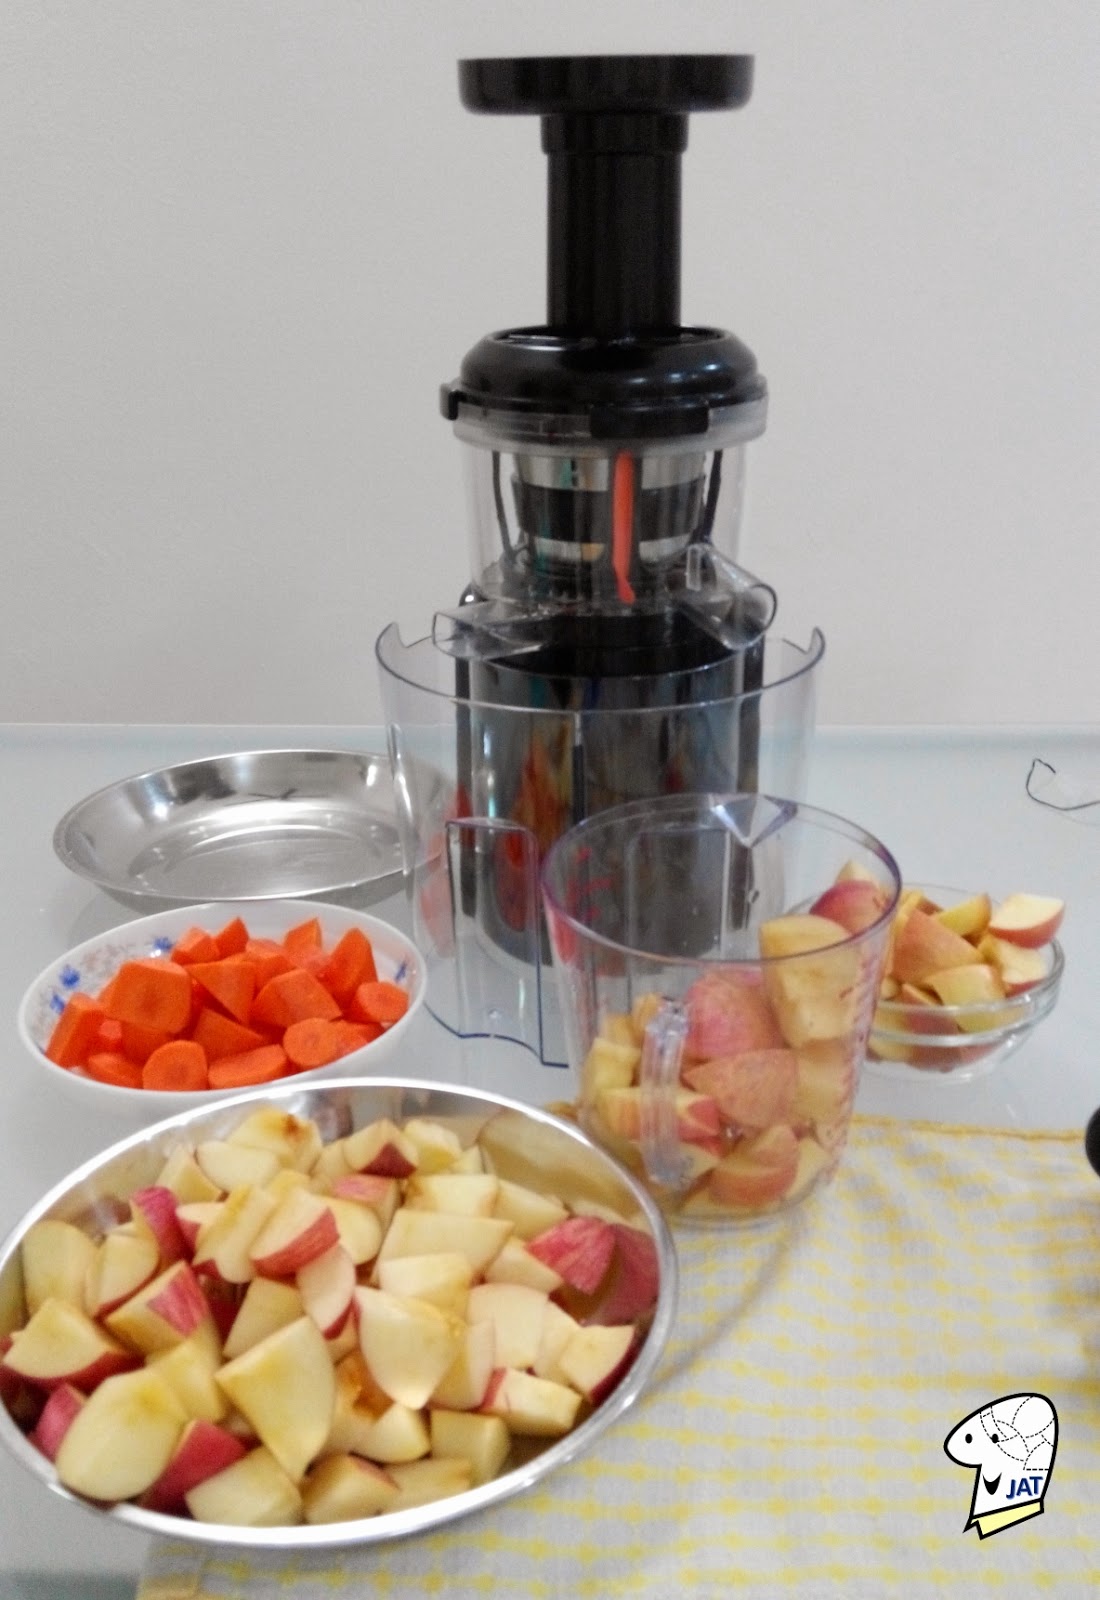 Bayers Dual Stage Slow Juicer, ready for use.